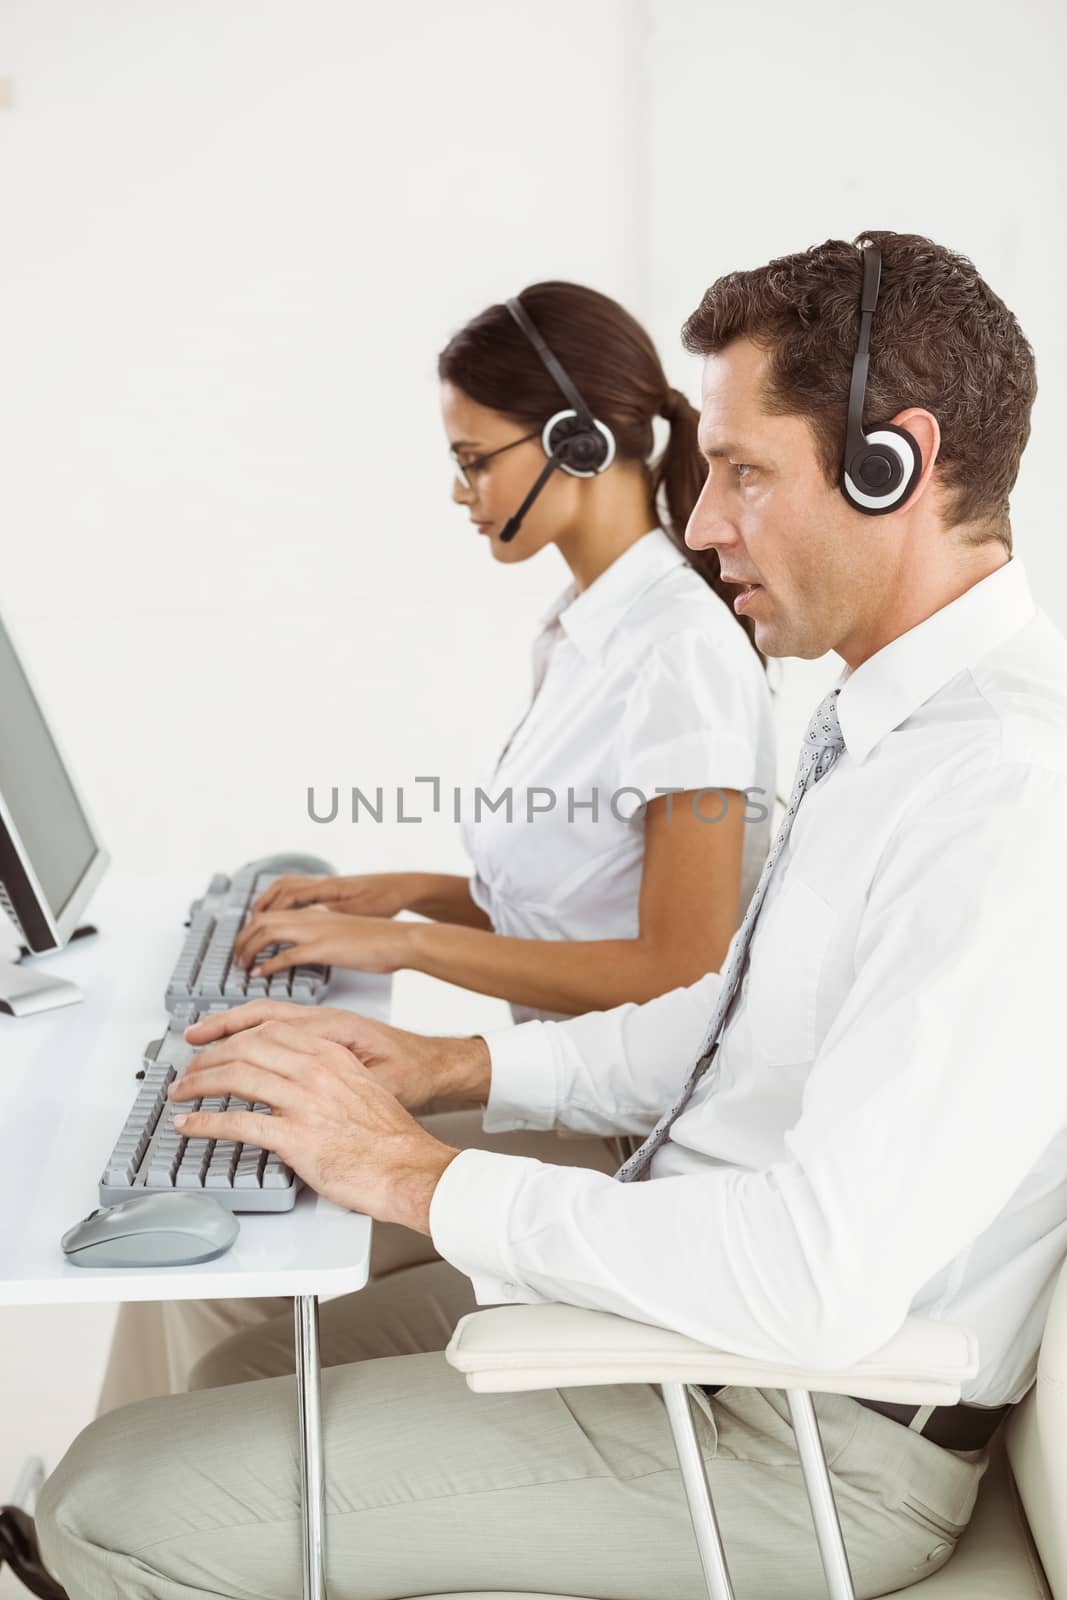 Business people with headsets using computers in office by Wavebreakmedia